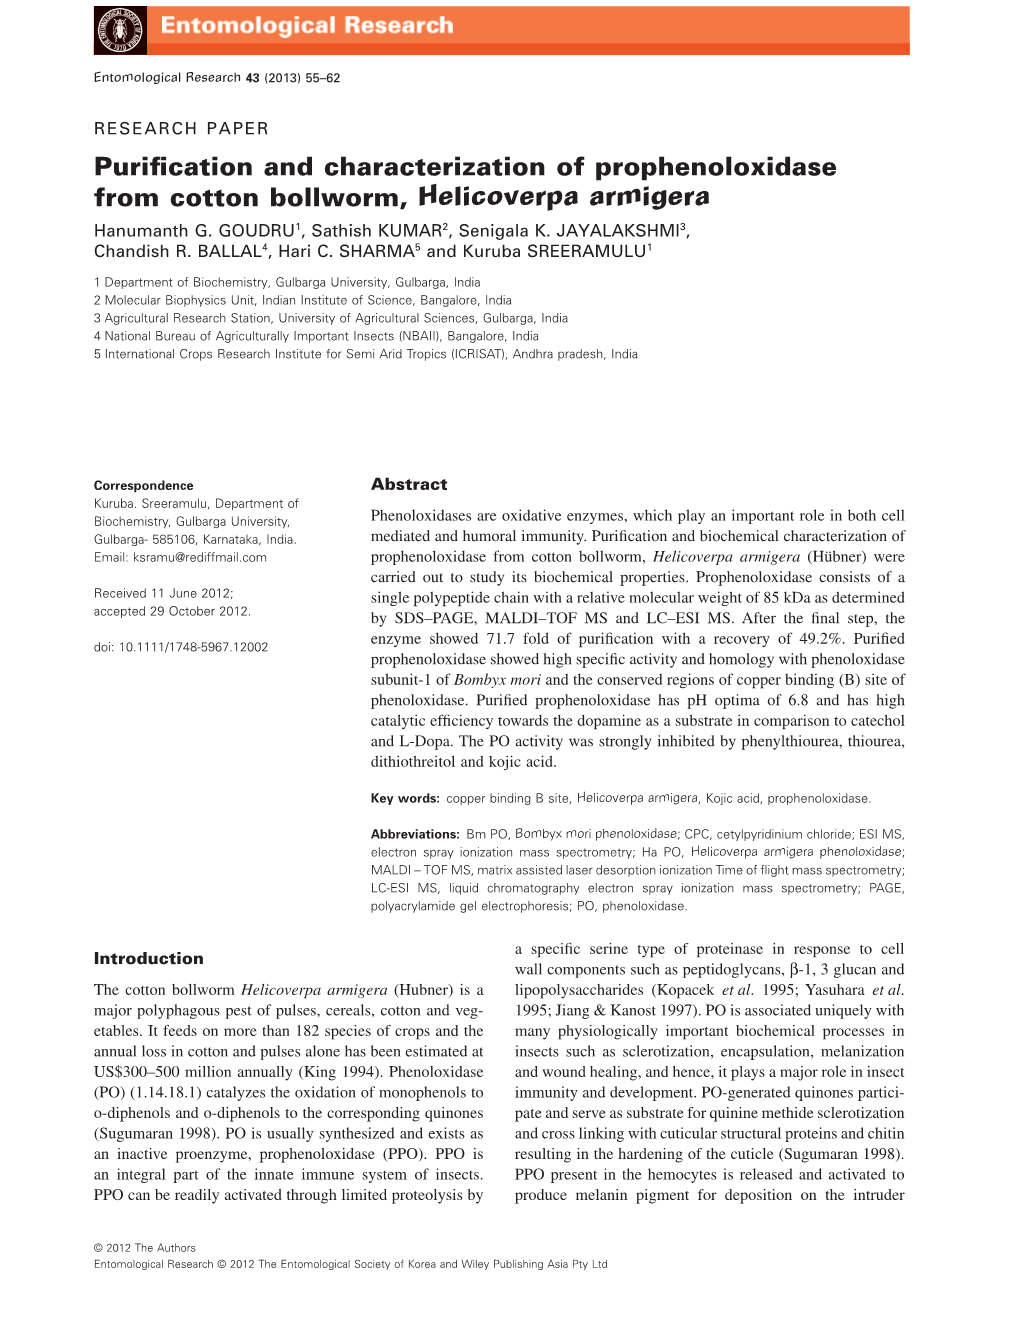 Purification and Characterization of Prophenoloxidase from Cotton